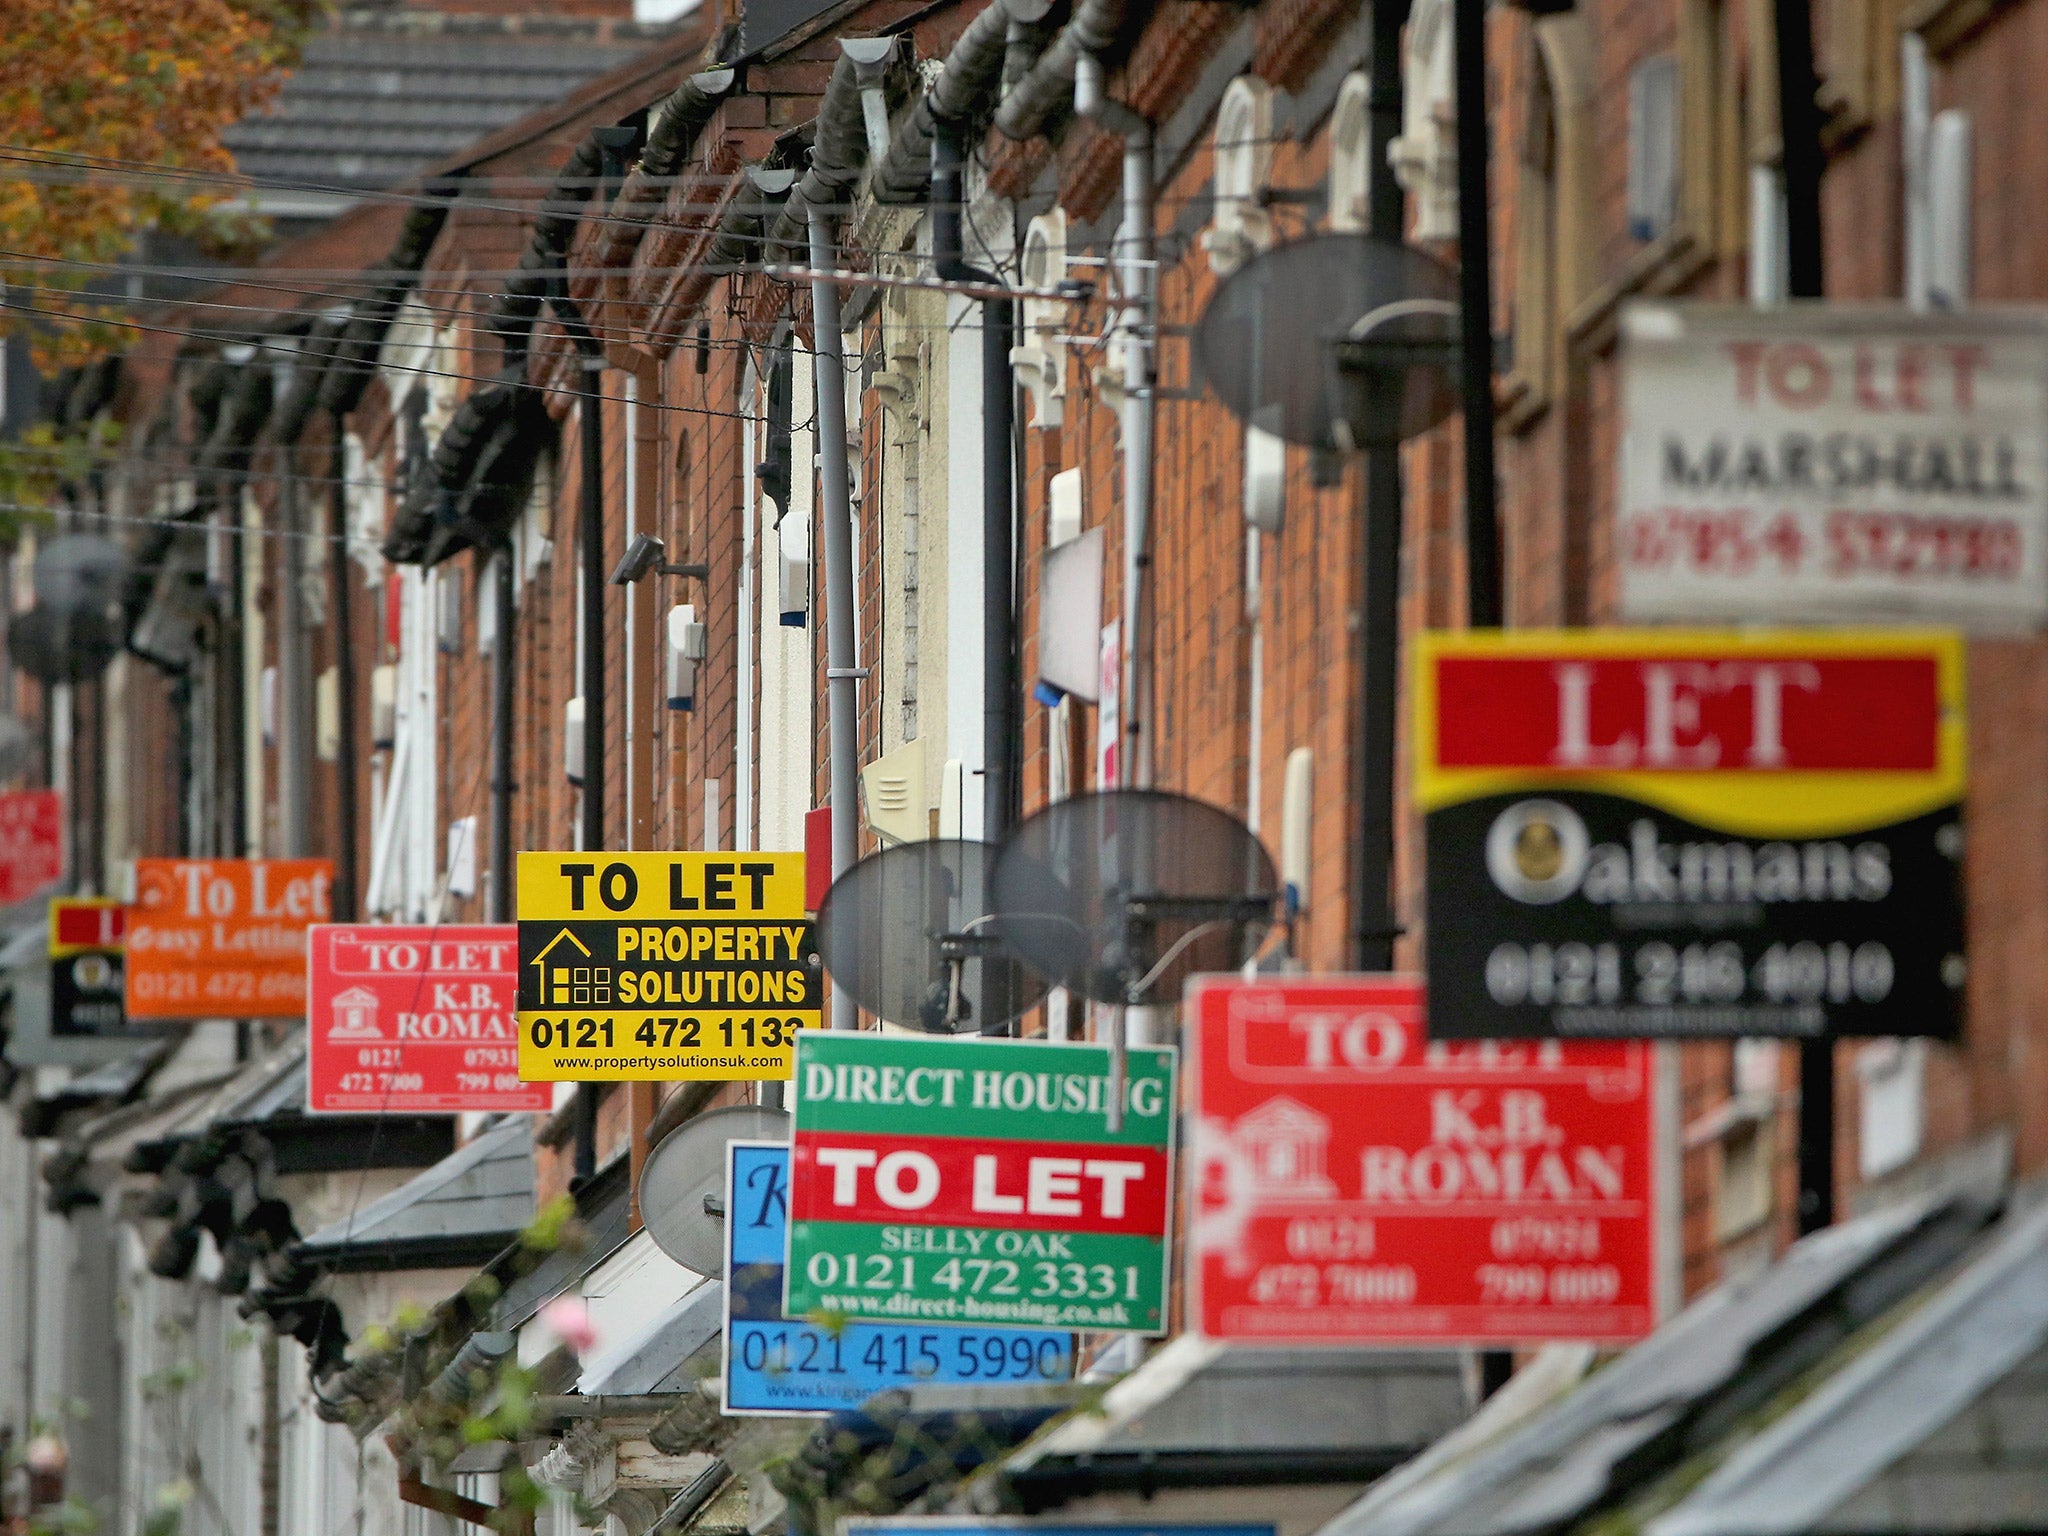 According to the federation, the average monthly rent in Britain was £750 at the end of 2013, compared with £400 across Europe